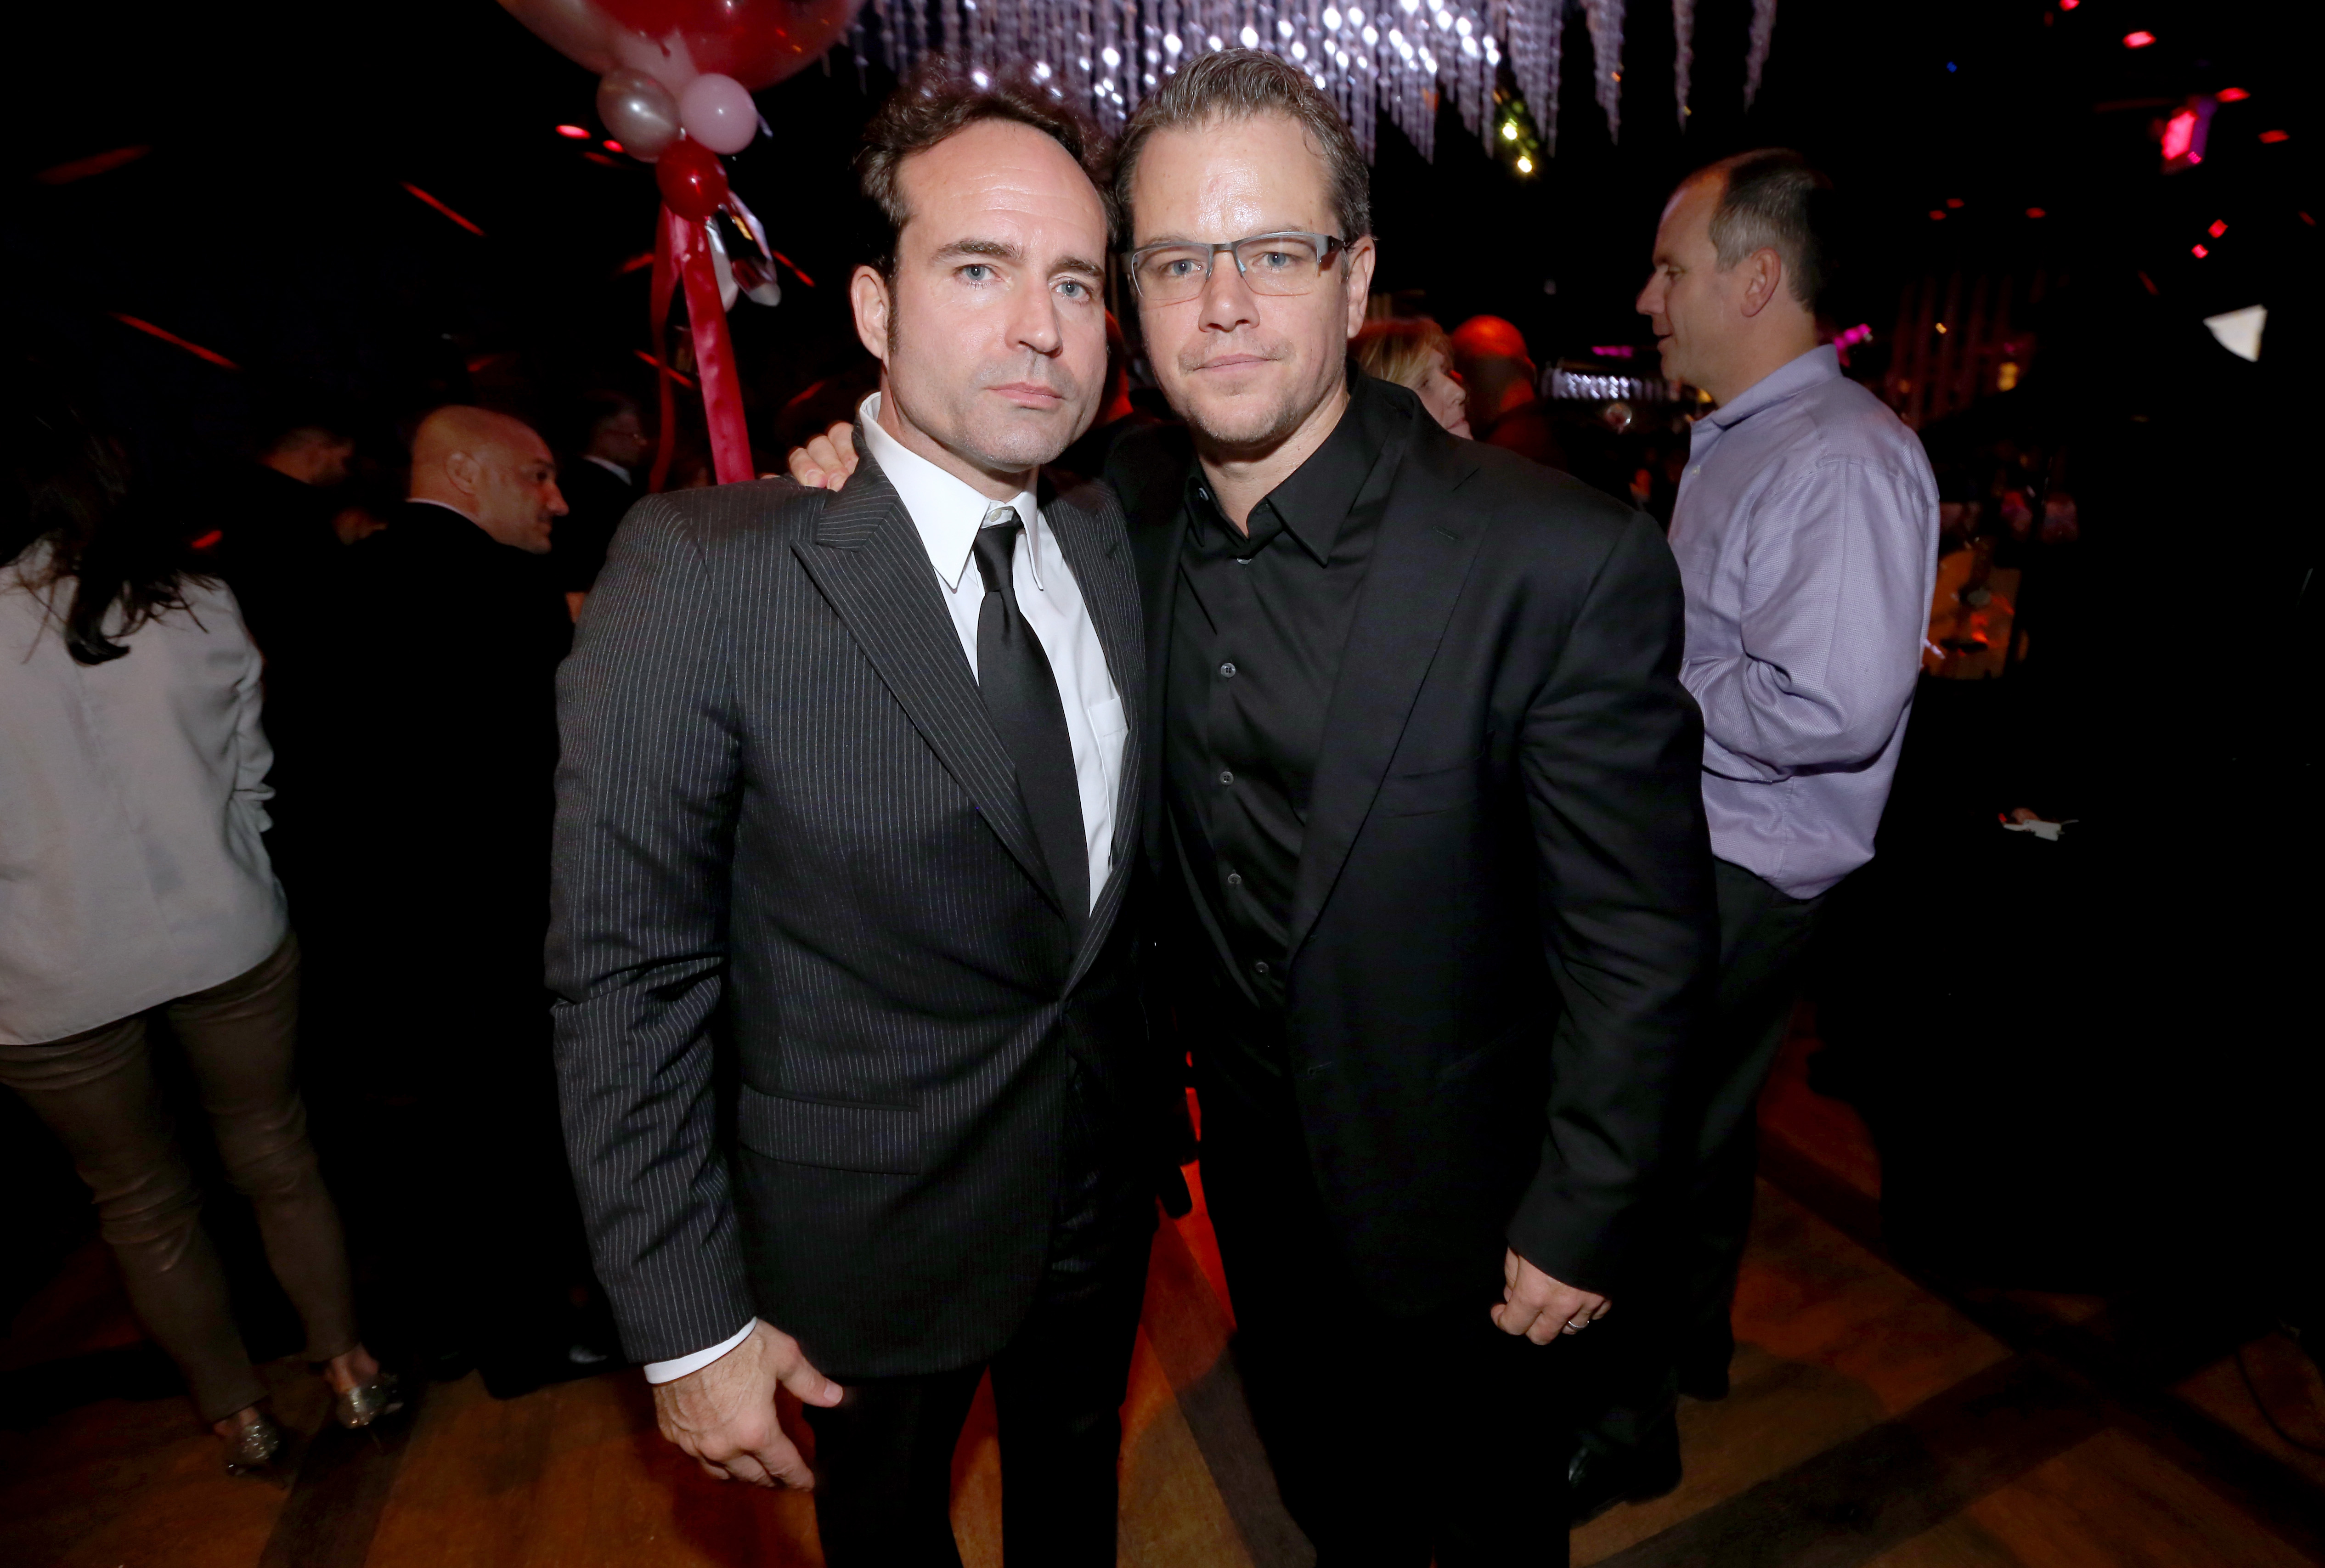 WEST HOLLYWOOD, CA - NOVEMBER 13:  Actor Matt Damon (R) and "Stand Up For Gus" founder Jason Patric attend the "Stand Up For Gus" Benefit at Bootsy Bellows on November 13, 2013 in West Hollywood, California.  (Photo by Christopher Polk/Getty Images for SUFG)